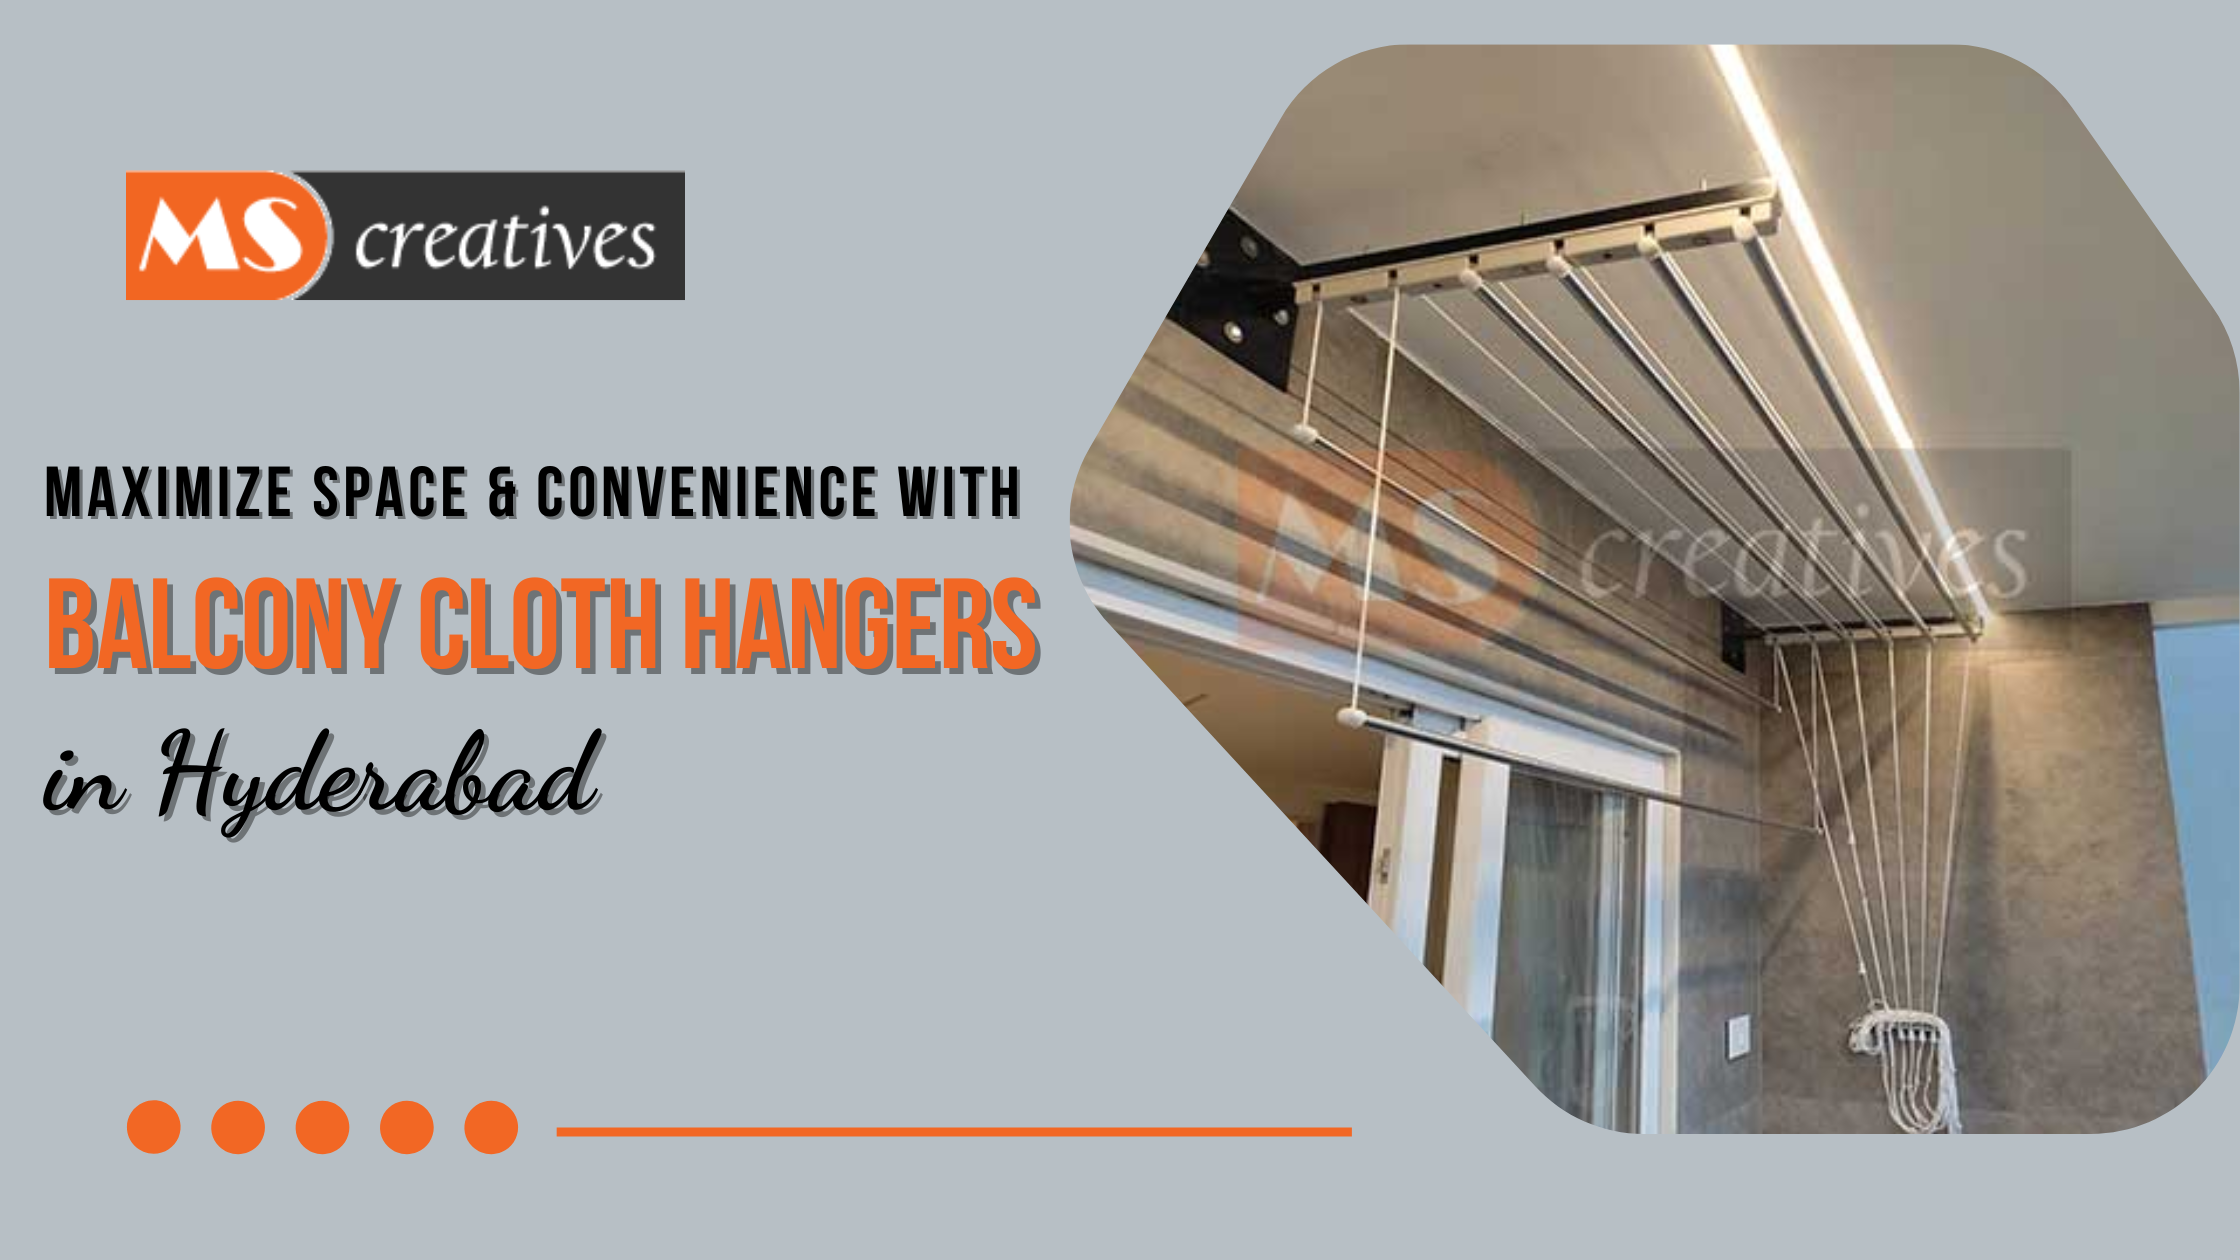 You are currently viewing Maximize Space & Convenience with Balcony Cloth Hangers in Hyderabad